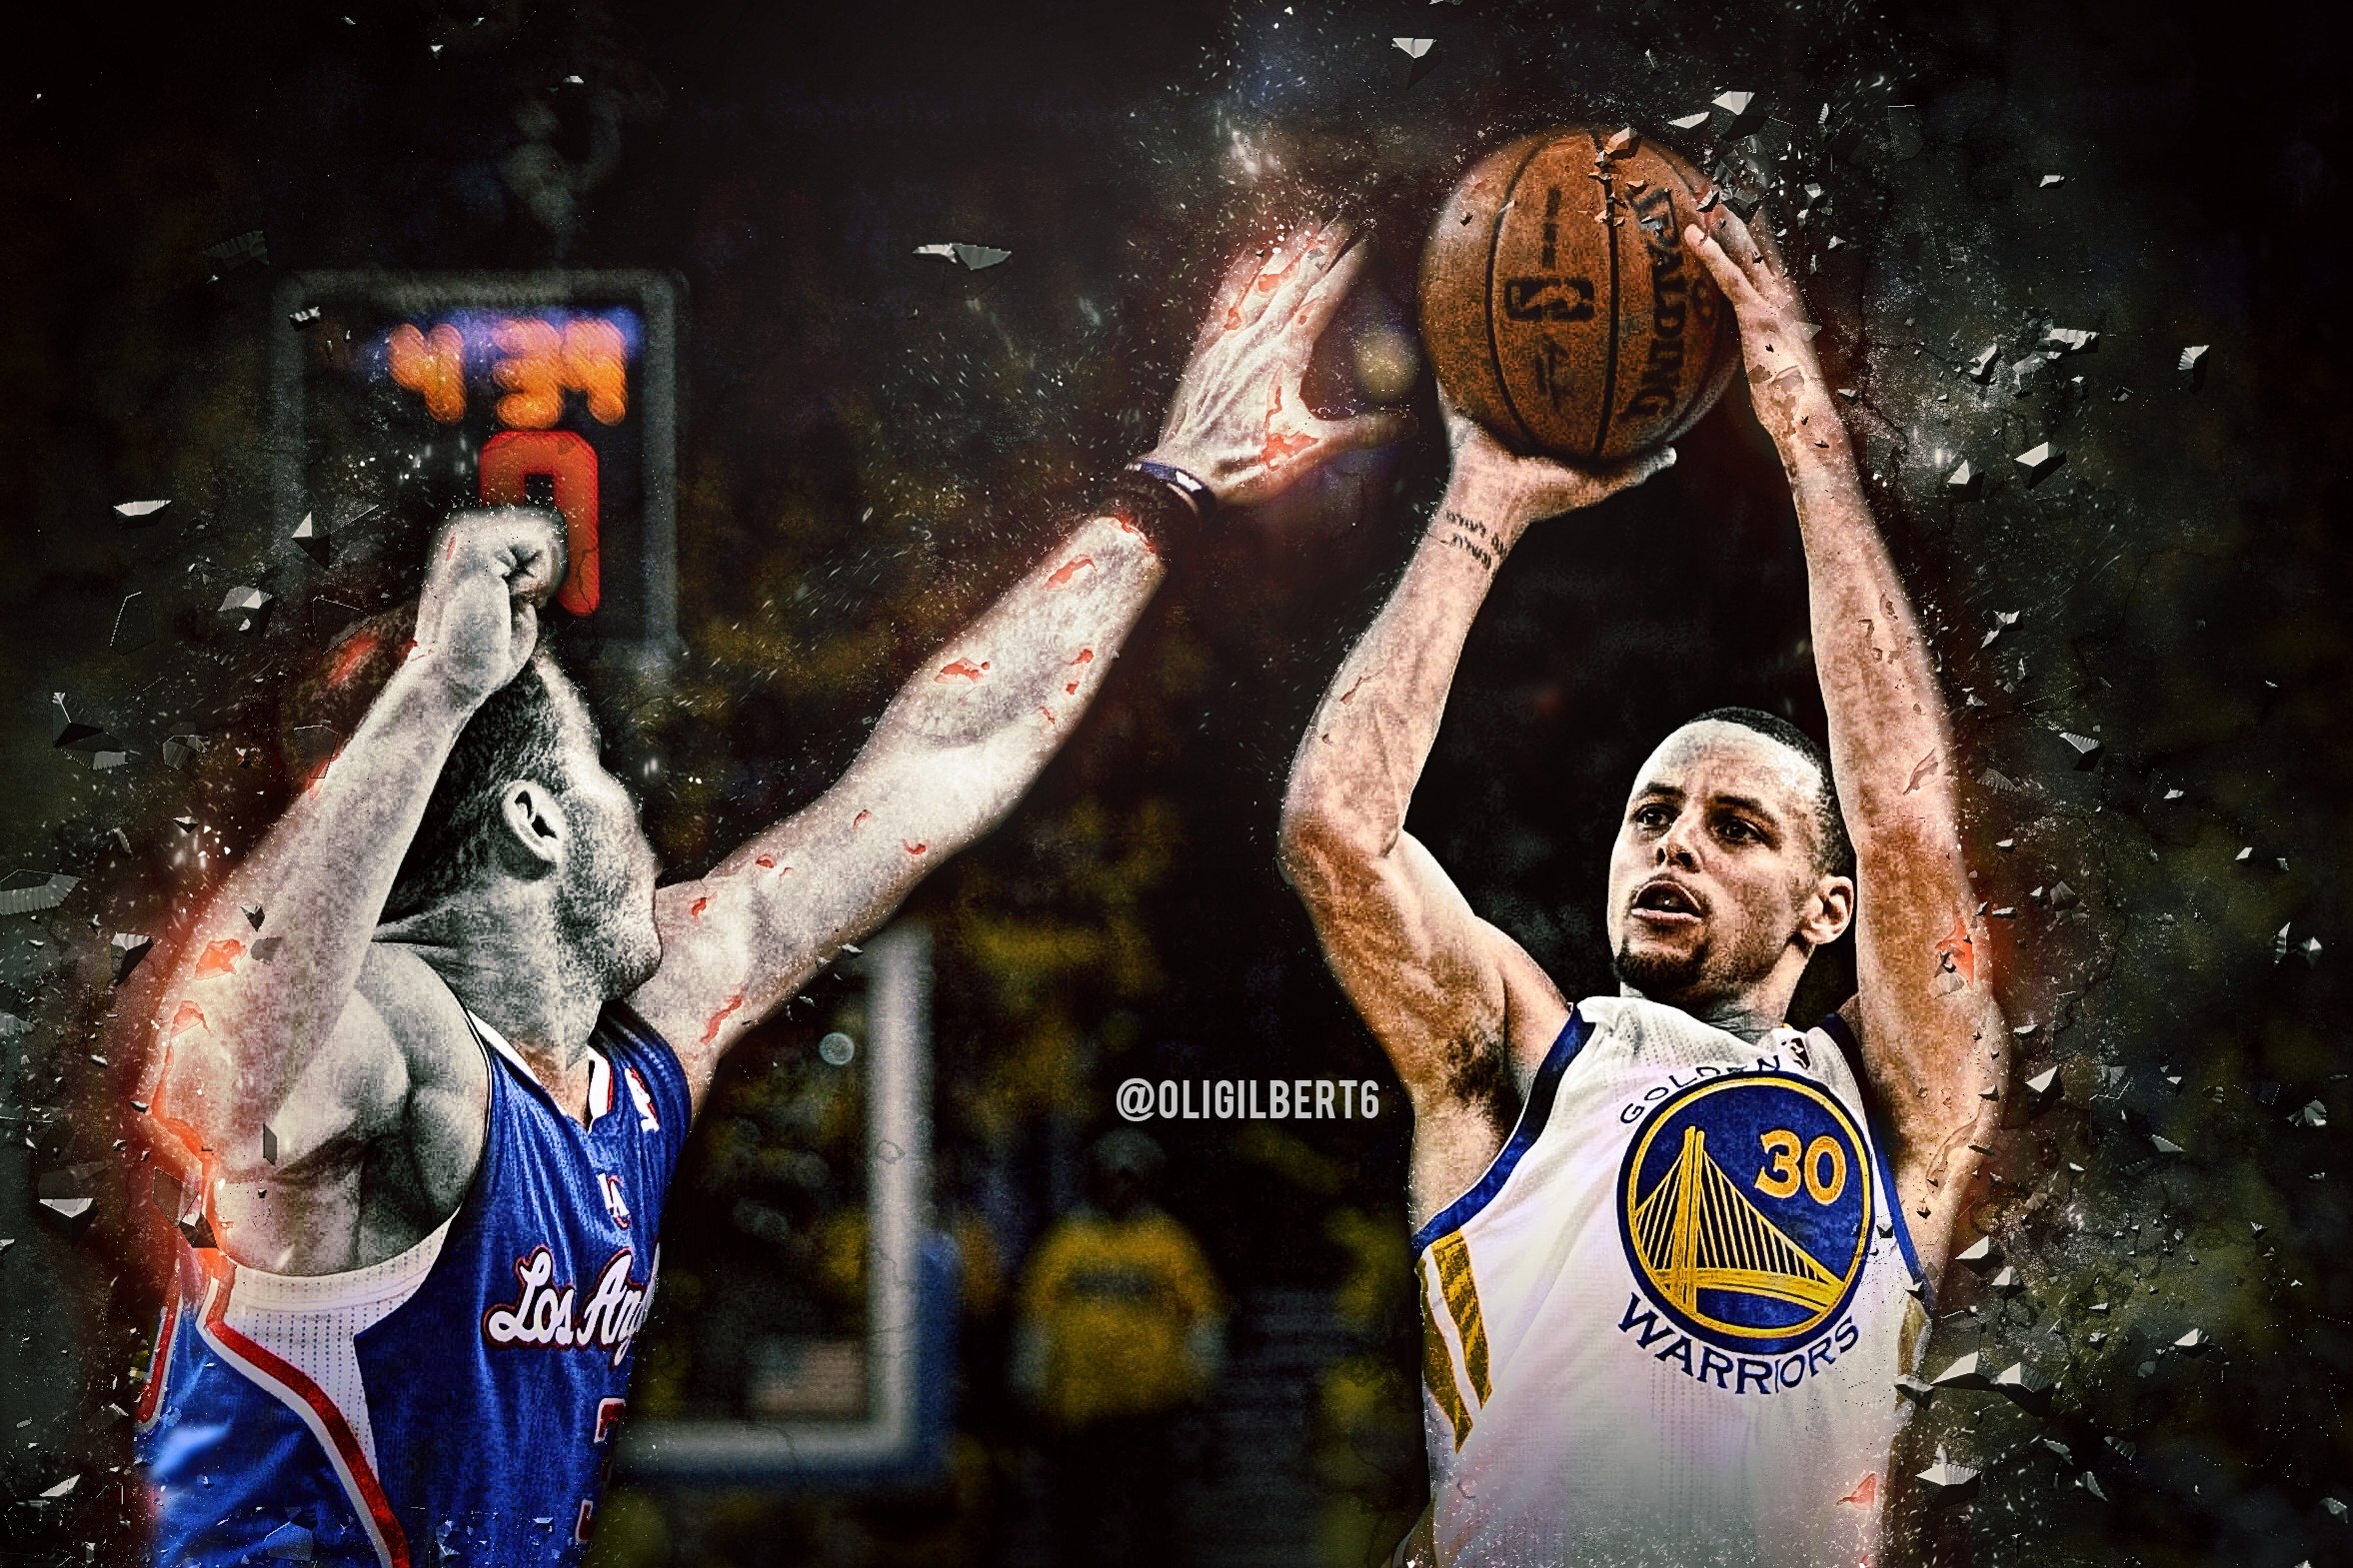 2354x1569 Title : latest stephen curry wallpaper 2018 for desktop, iphone &amp;  mobile. Dimension : 2354 x 1569. File Type : JPG/JPEG